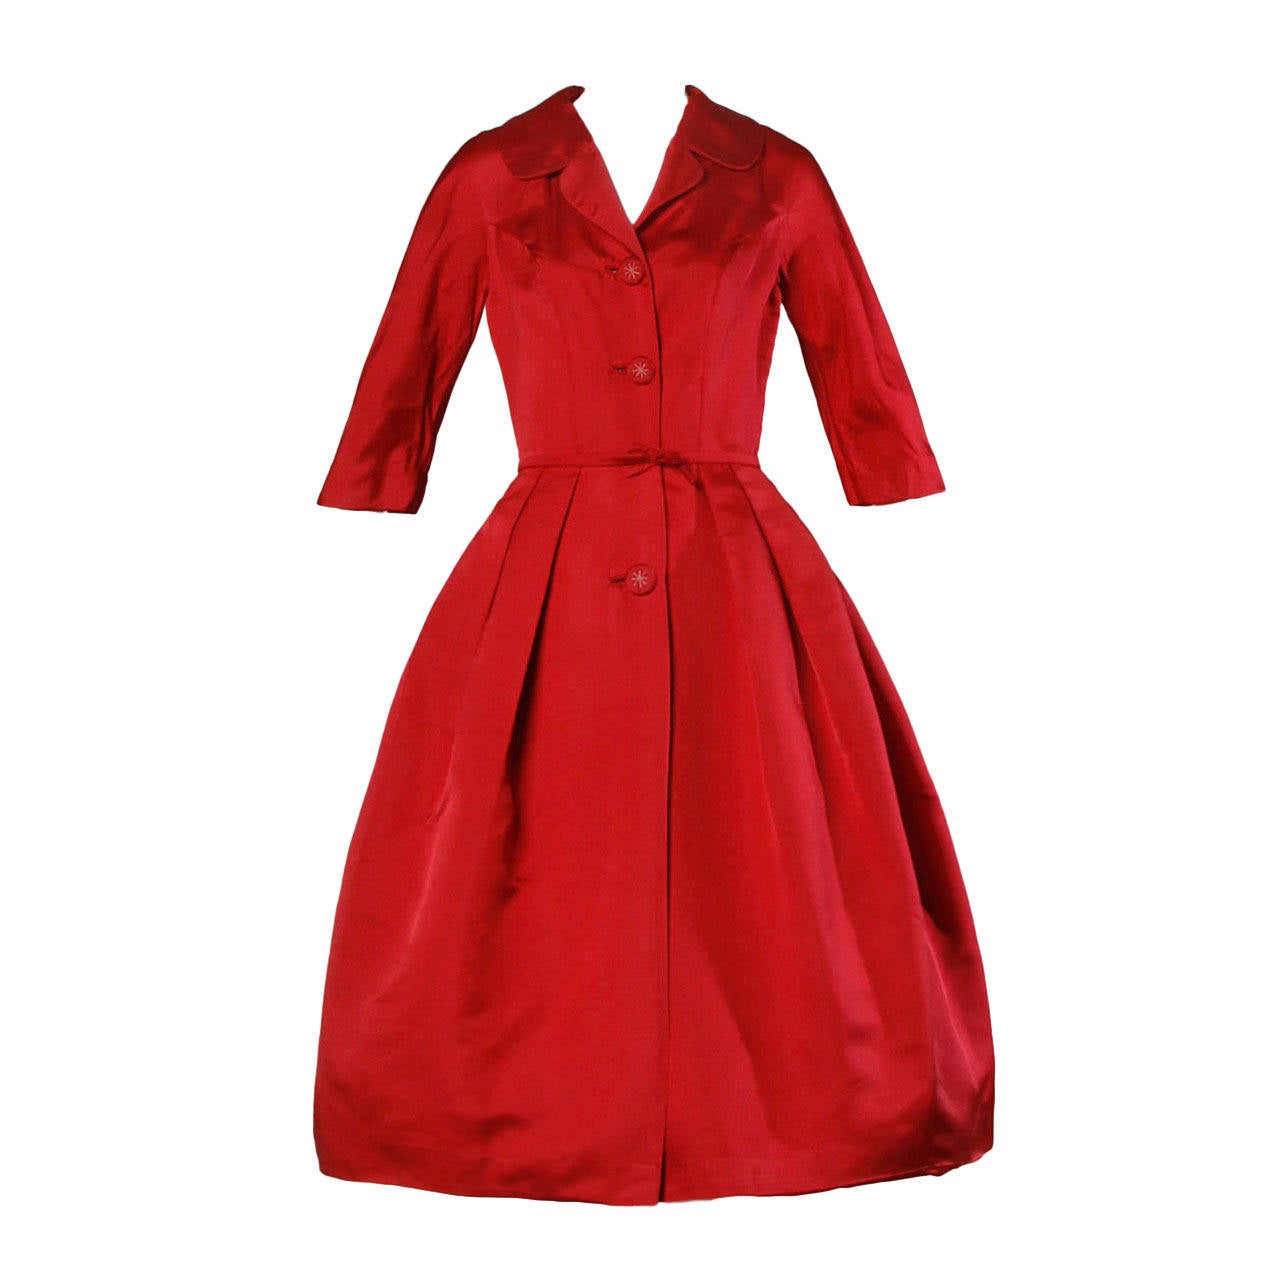 1950s Vintage New Look Red Dress with Starburst Buttons